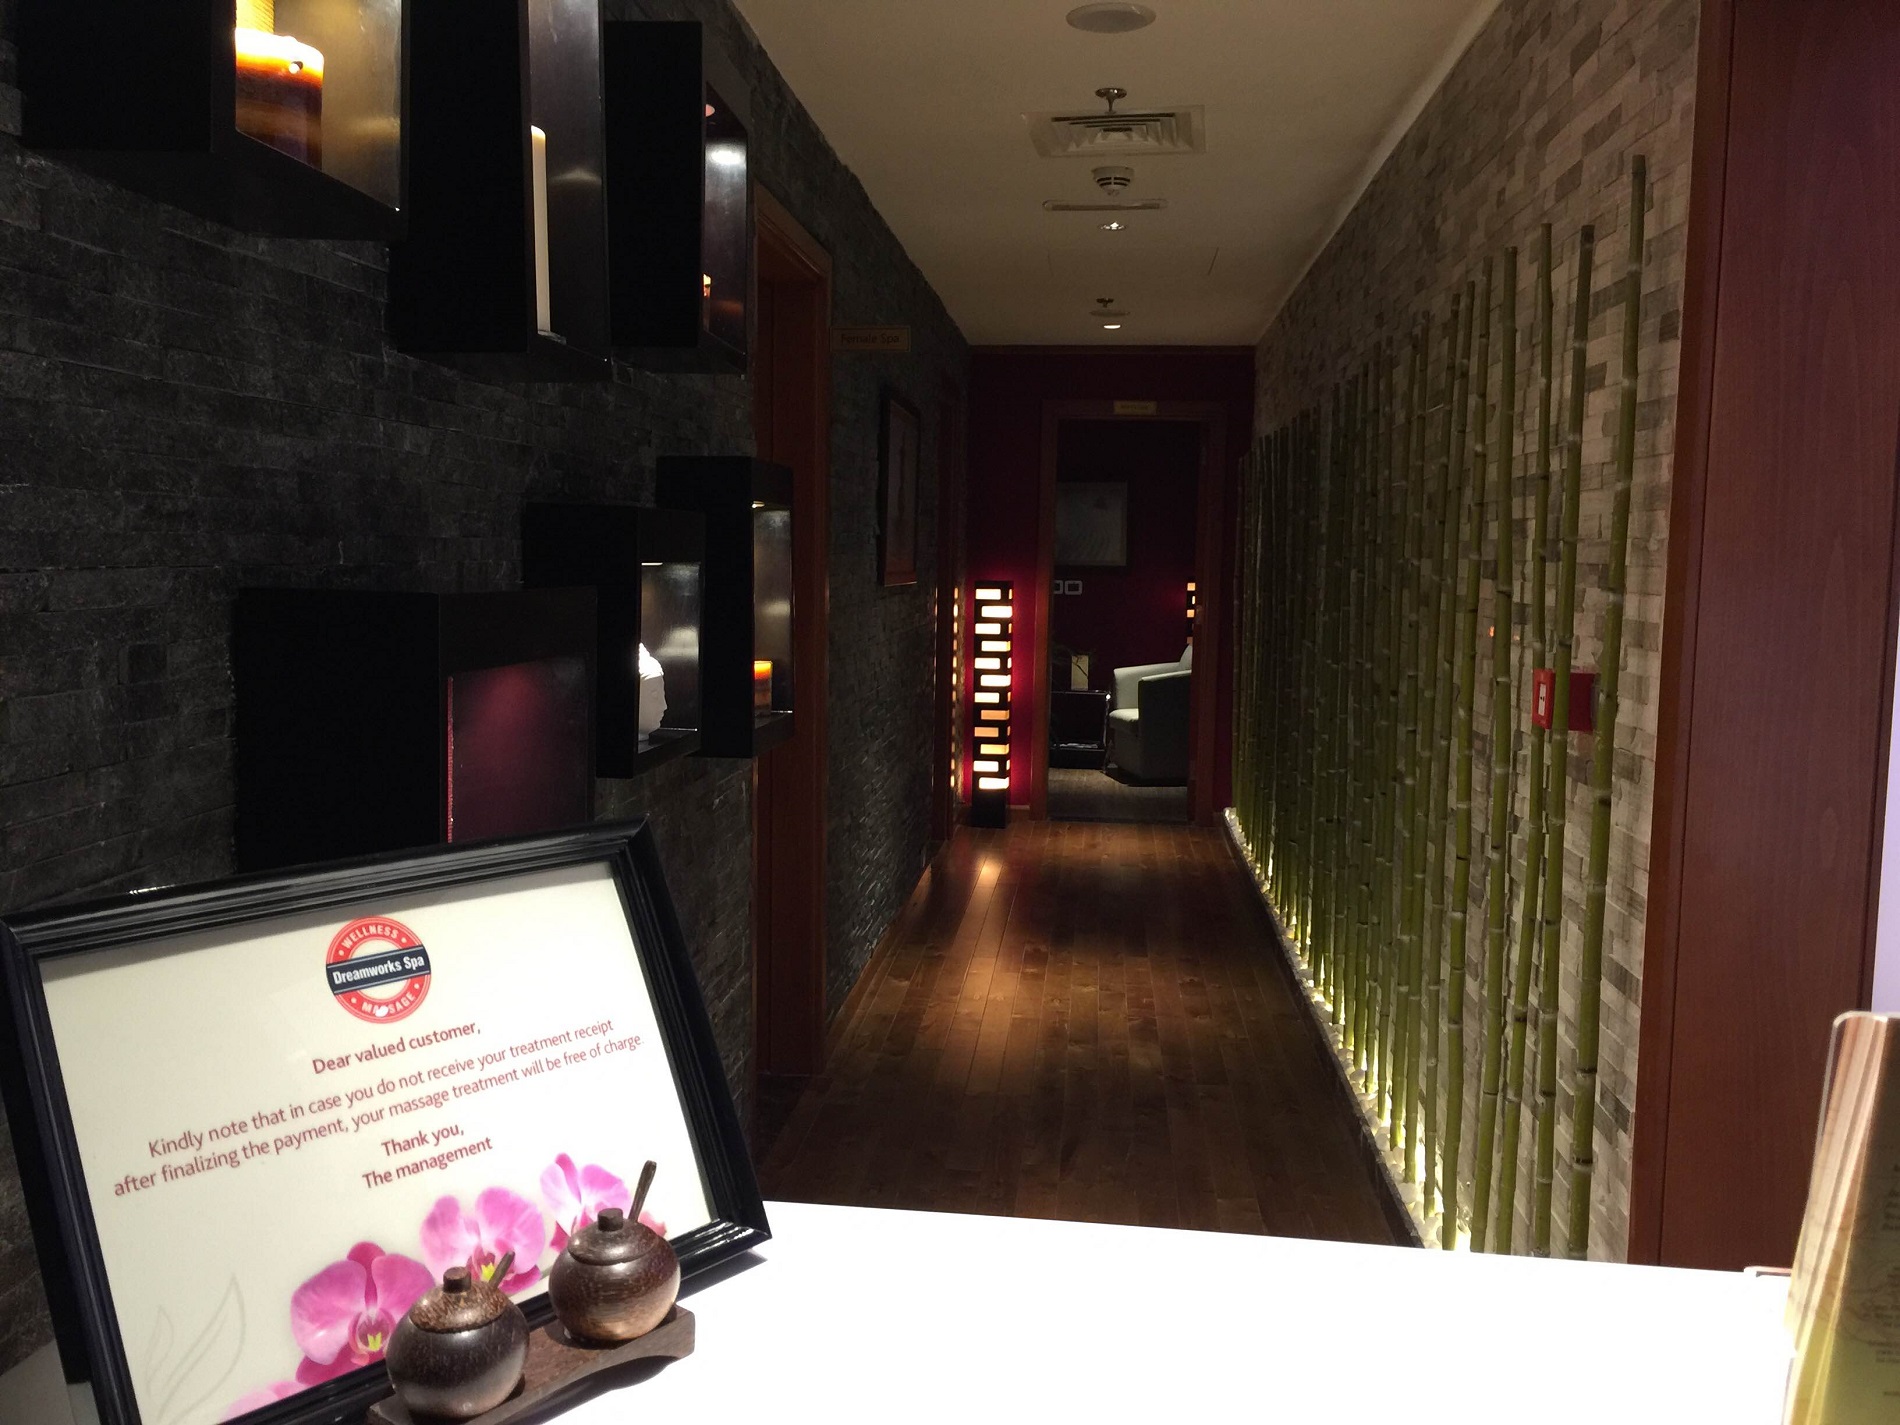 {"id":7,"facility_id":6,"lang_id":1,"hotel_id":201000002,"name":"Dreamworks Spa","slug":"dreamworks-spa","description":"<p>Located on ground floor. Offers a variety of Balinese massage services with separate treatment rooms for ladies and gents.<\/p>\r\n\r\n<p>For booking, contact&nbsp;<a href=\"tel:+97145014427\">+97145014427<\/a><\/p>\r\n\r\n<p>[break]<\/p>\r\n\r\n<table class=\"table table-dark table-striped table-bordered\">\r\n\t<thead>\r\n\t\t<tr>\r\n\t\t\t<th>Facility<\/th>\r\n\t\t\t<th>Timing<\/th>\r\n\t\t<\/tr>\r\n\t<\/thead>\r\n\t<tbody>\r\n\t\t<tr>\r\n\t\t\t<td>Dreamworks Spa<\/td>\r\n\t\t\t<td>10:00 am to 10:00 pm<\/td>\r\n\t\t<\/tr>\r\n\t<\/tbody>\r\n<\/table>","sort":2,"status":1,"created_at":"2019-10-30 07:22:50","updated_at":"2019-11-22 11:00:45","deleted_at":null,"image_slider":{"id":1355,"lang_id":1,"image_sliderable_id":7,"image_sliderable_type":"App\\HotelFacility","image_slider":"uploads\/image-slider\/eff6345178698563ac3697e190ec25c31576683055.jpg","name":null,"sub_name":null,"content":null,"status":1,"created_at":"2019-12-18 15:30:55","updated_at":"2019-12-18 15:30:55","sort":null,"is_mobile":0}}-slider